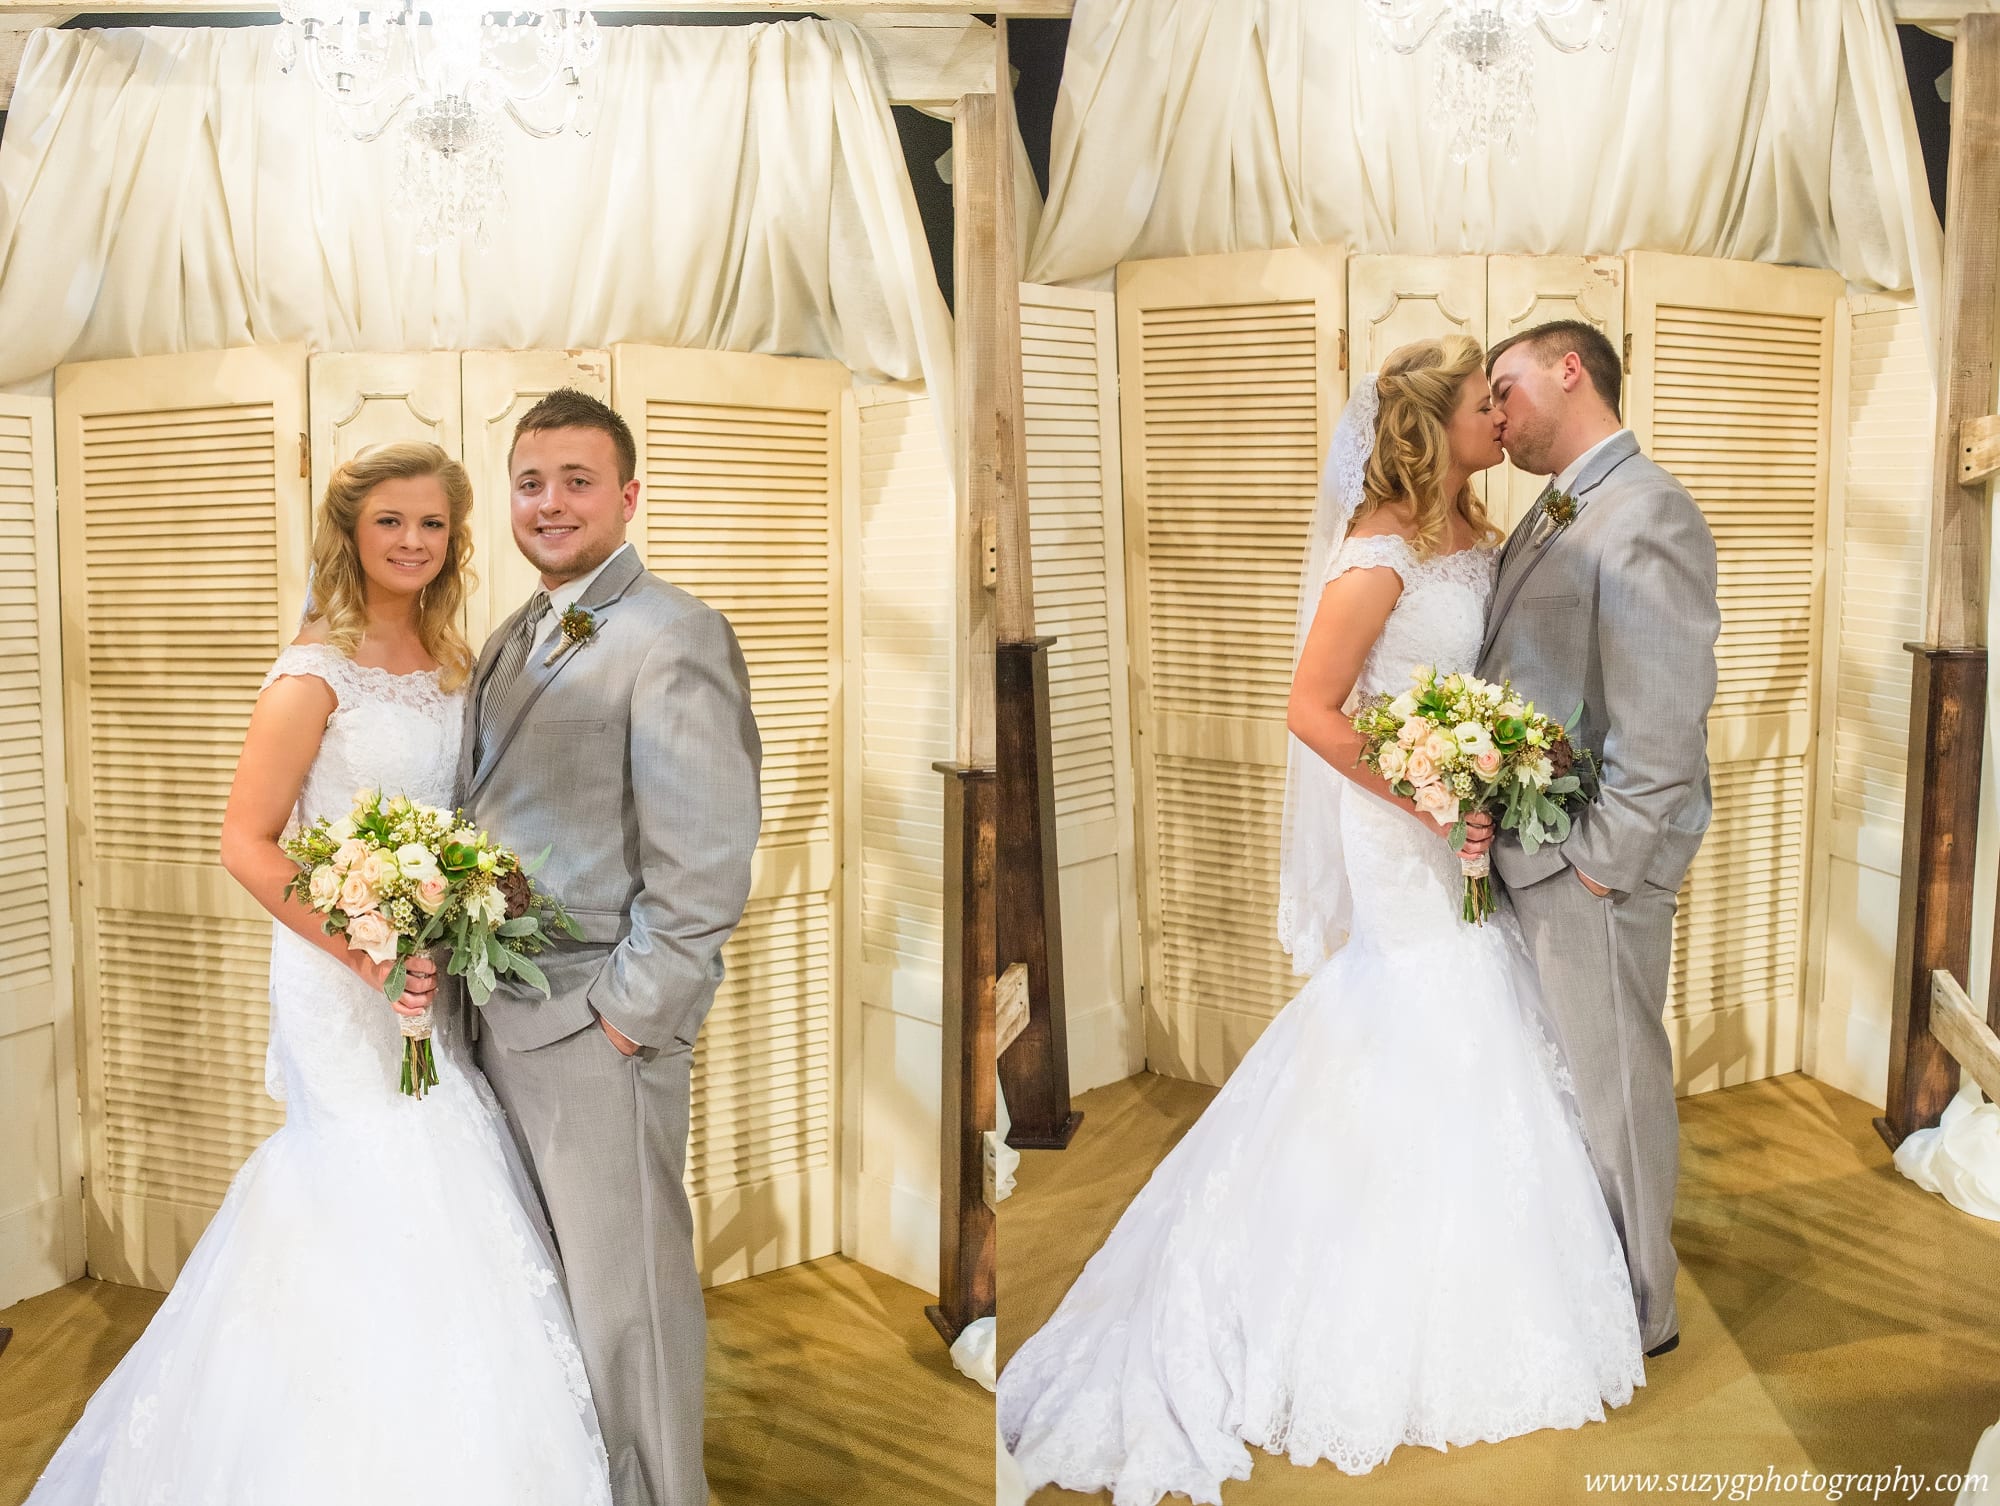 vows by victoria-lake charles-wedding-photography-suzy g-photography-suzygphotography_0067